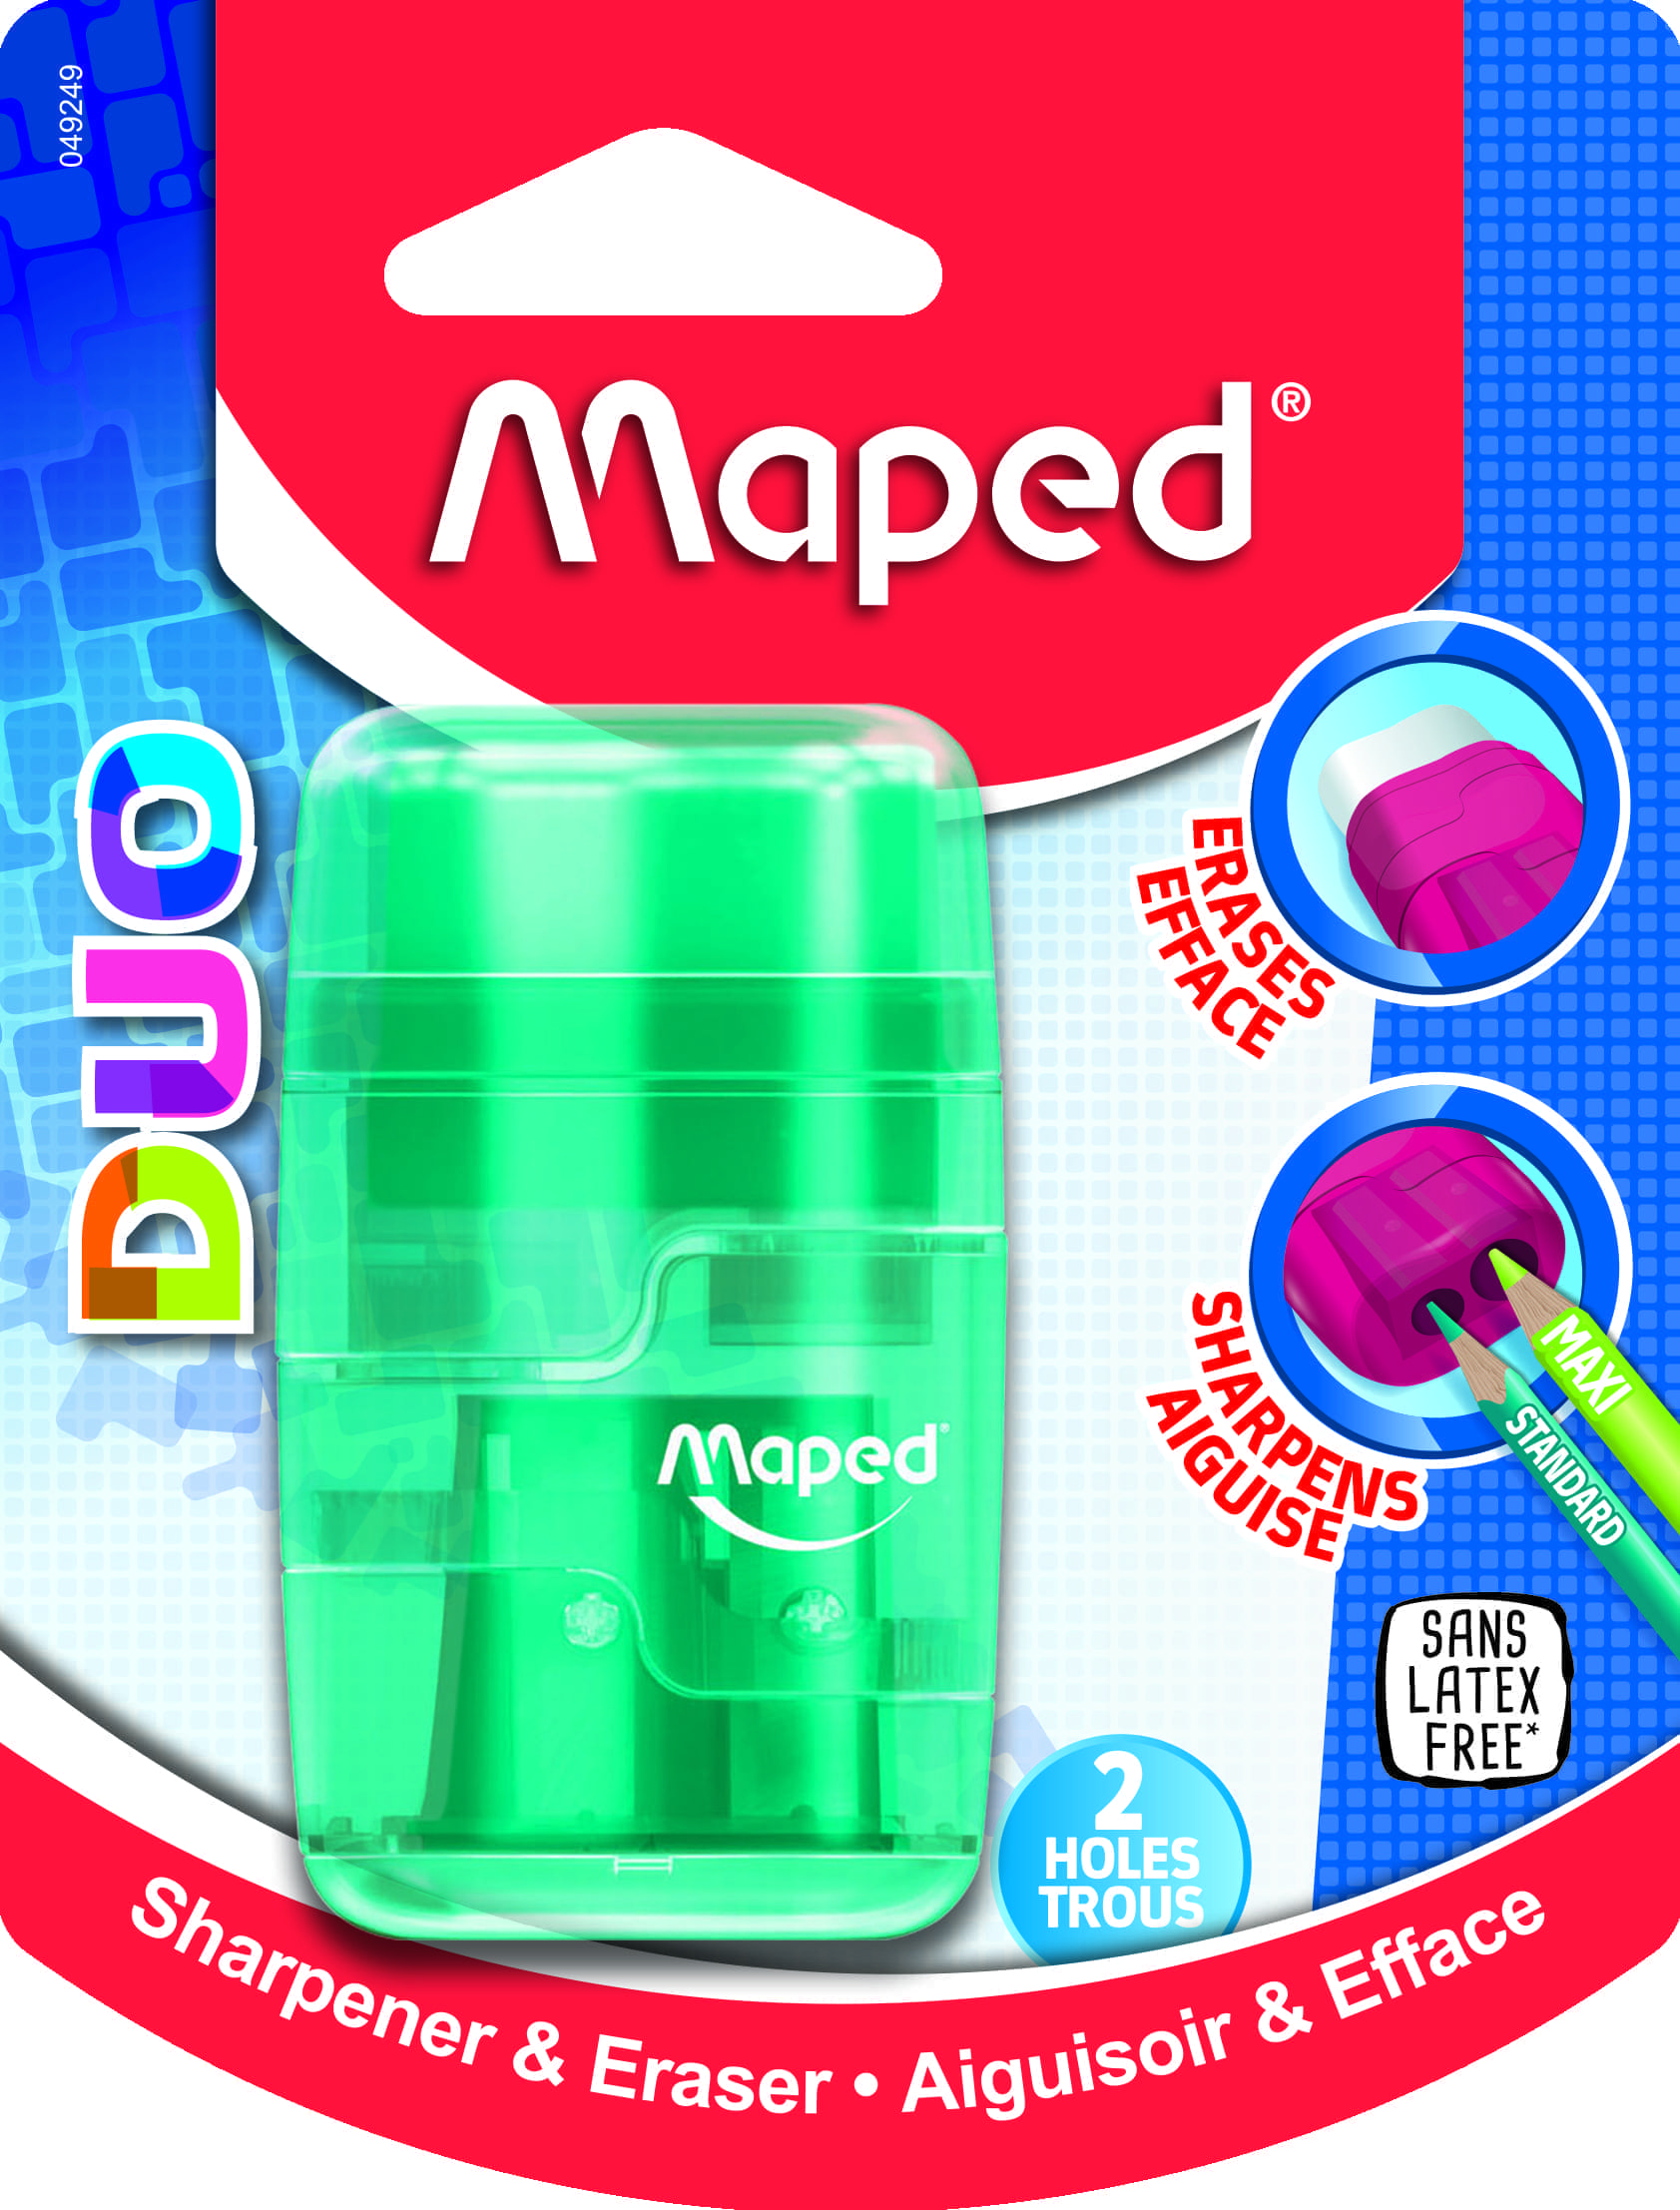 Maped Helix USA Maped KidiCut Spring-Assisted & Craft Plastic